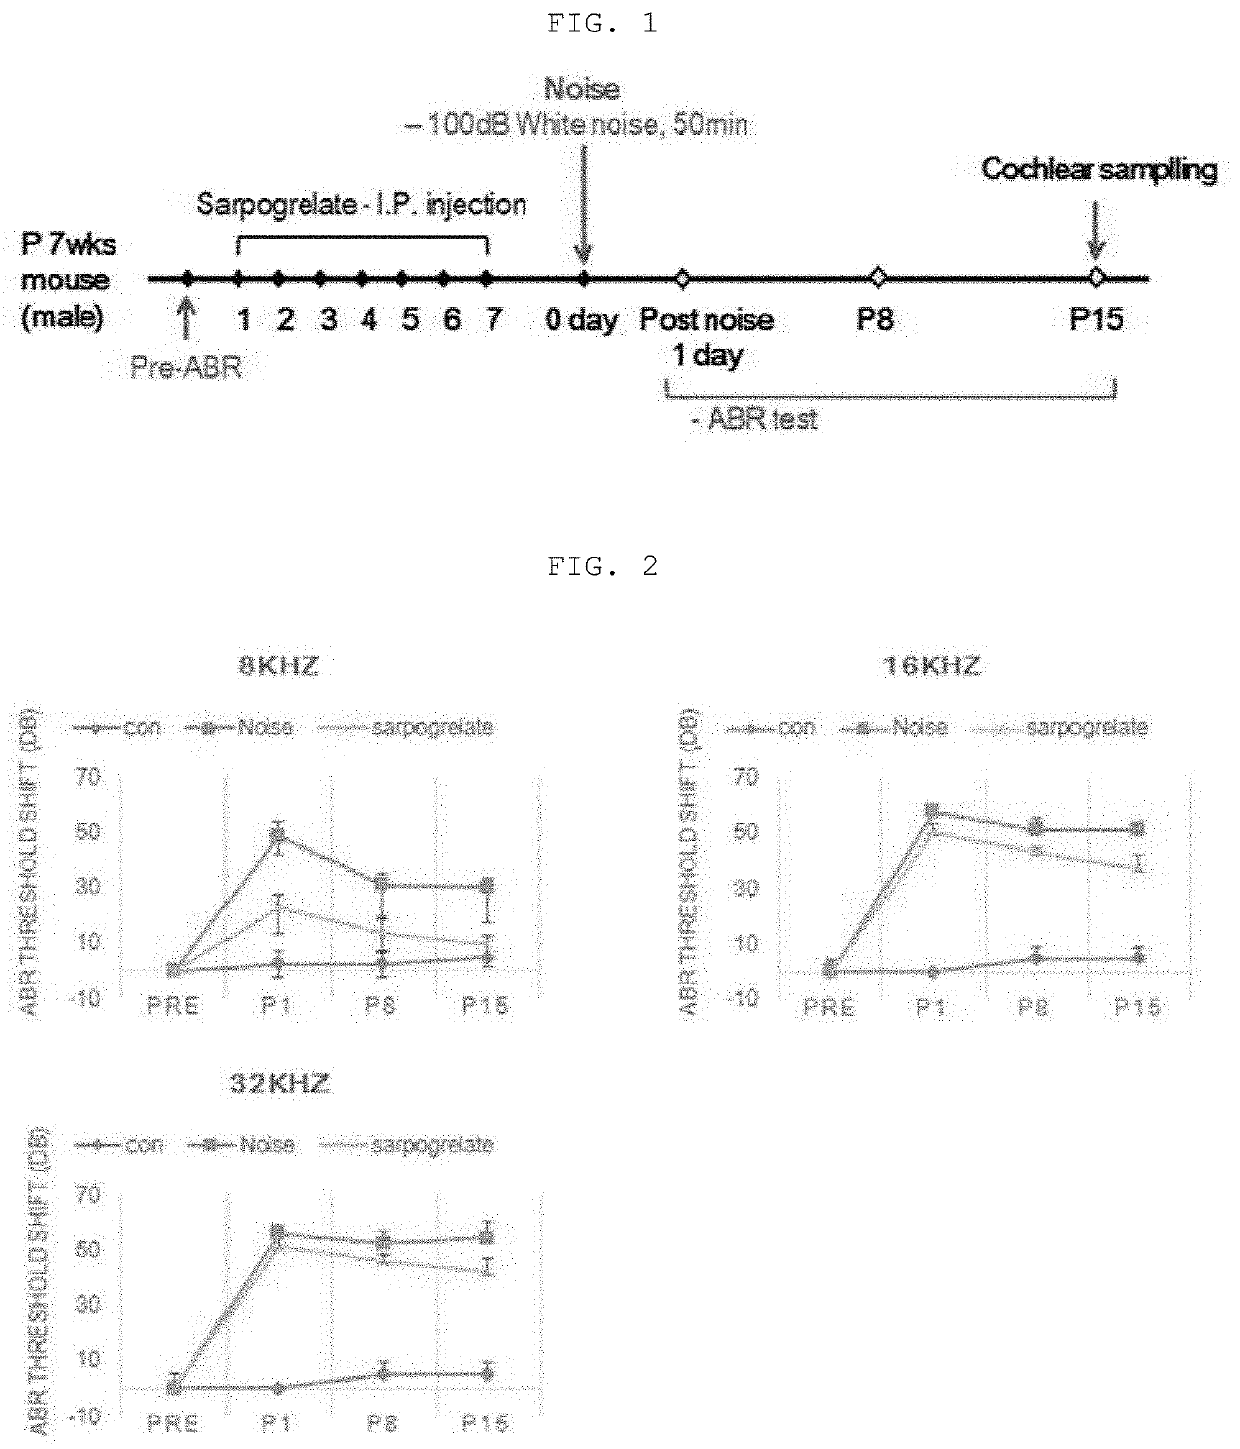 Composition, containing sarpogrelate as active ingredient, for preventing or treating sensorineural hearing loss